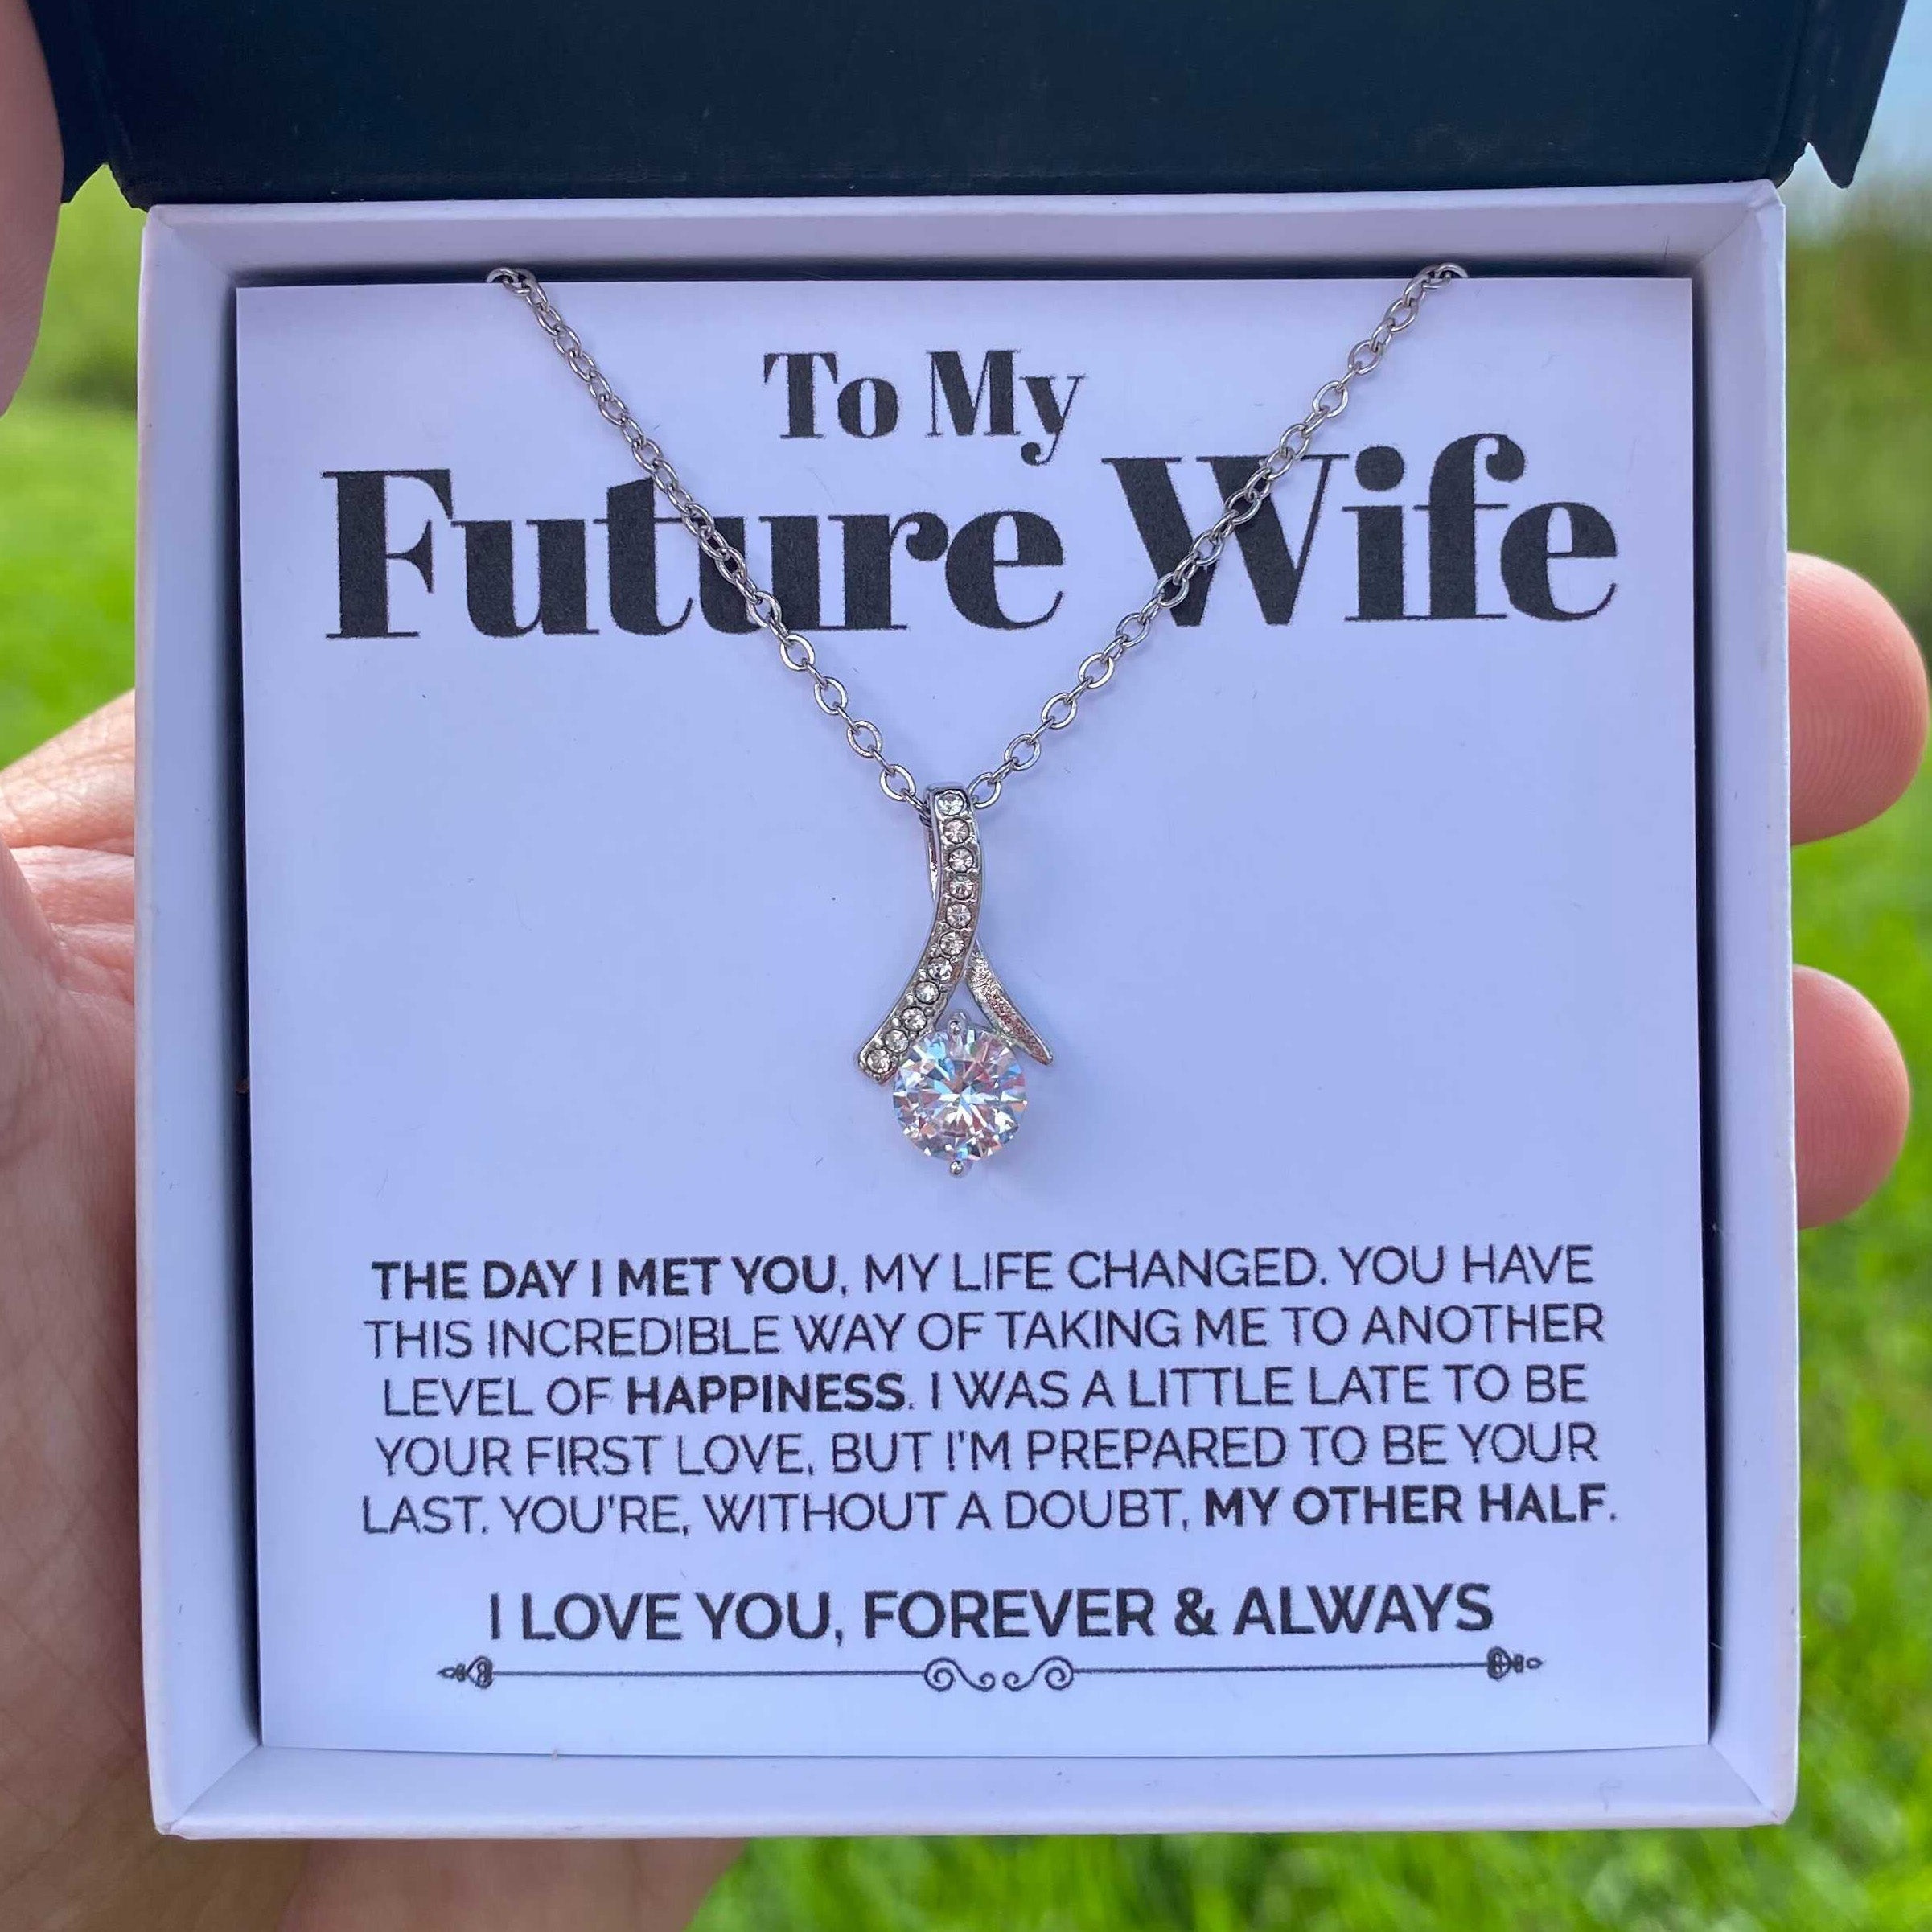 Glow Up To My Future Wife - Ribbon Necklace - The Day I Met You